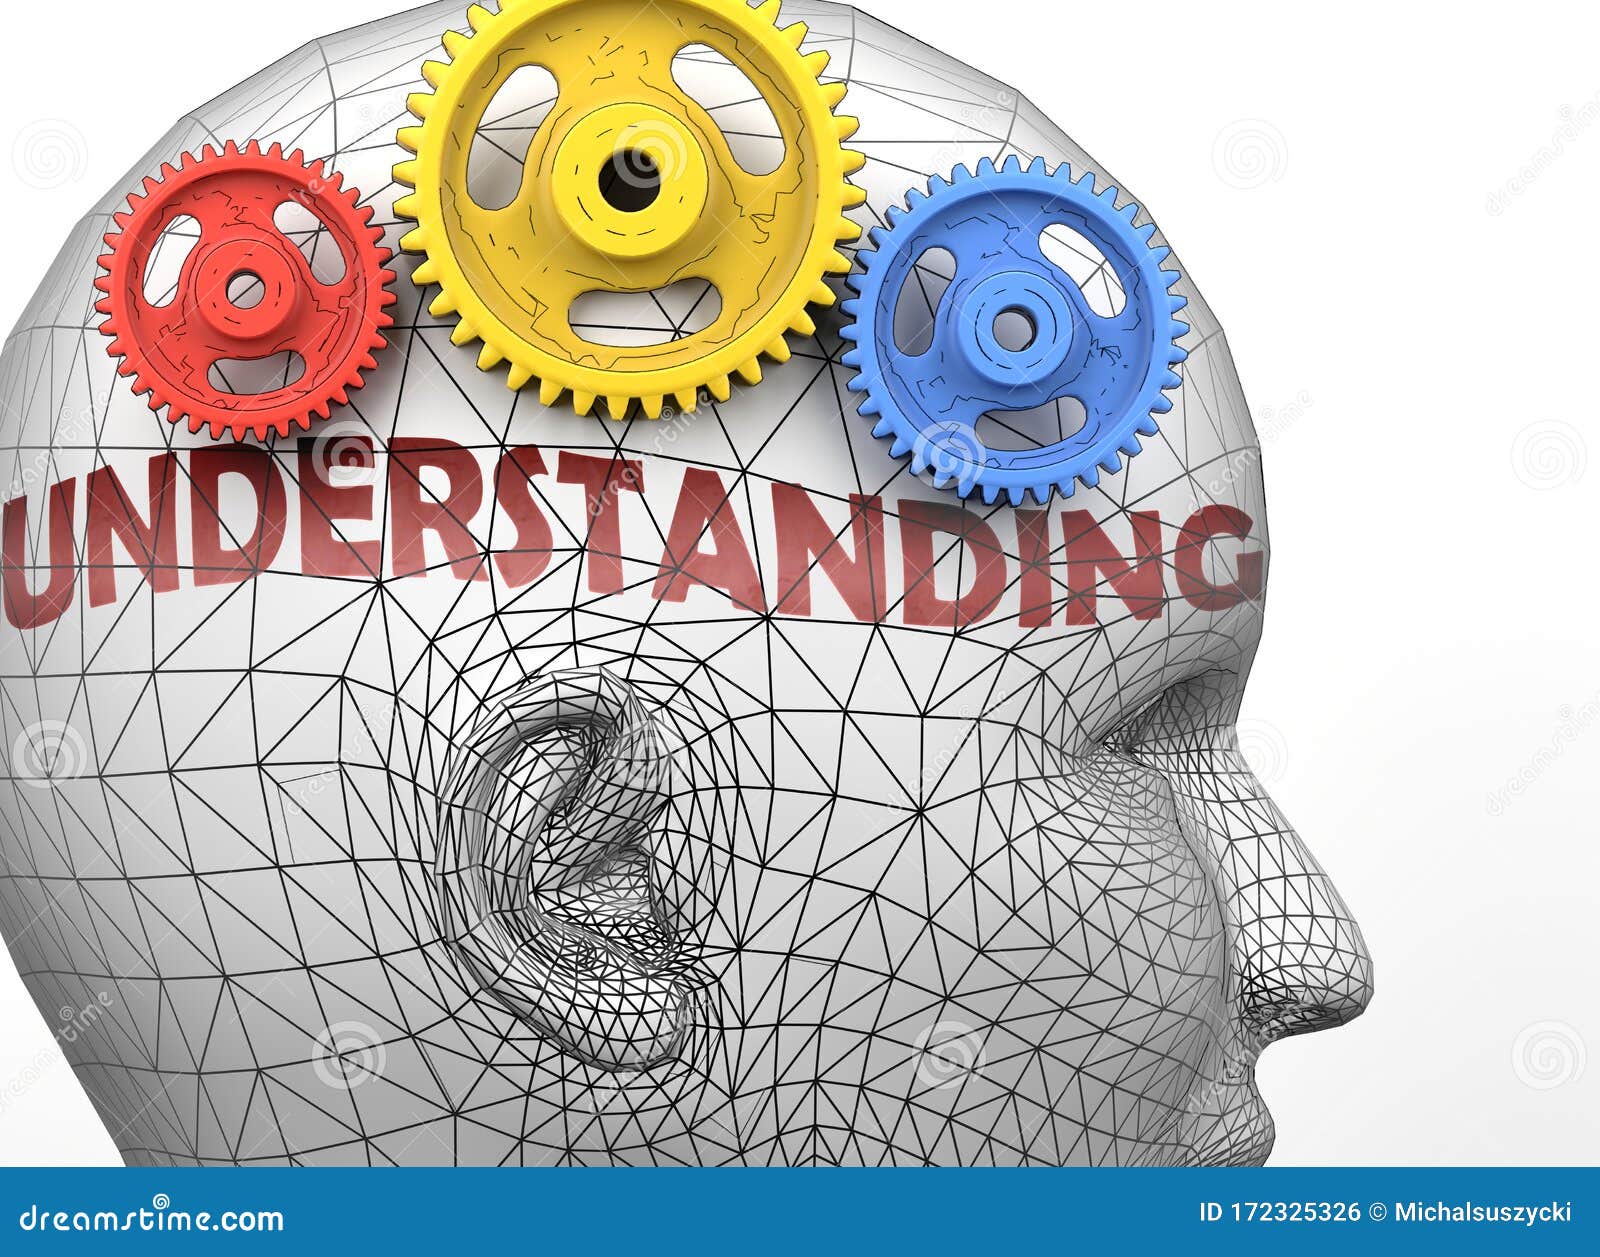 understanding and human mind - pictured as word understanding inside a head to ize relation between understanding and the